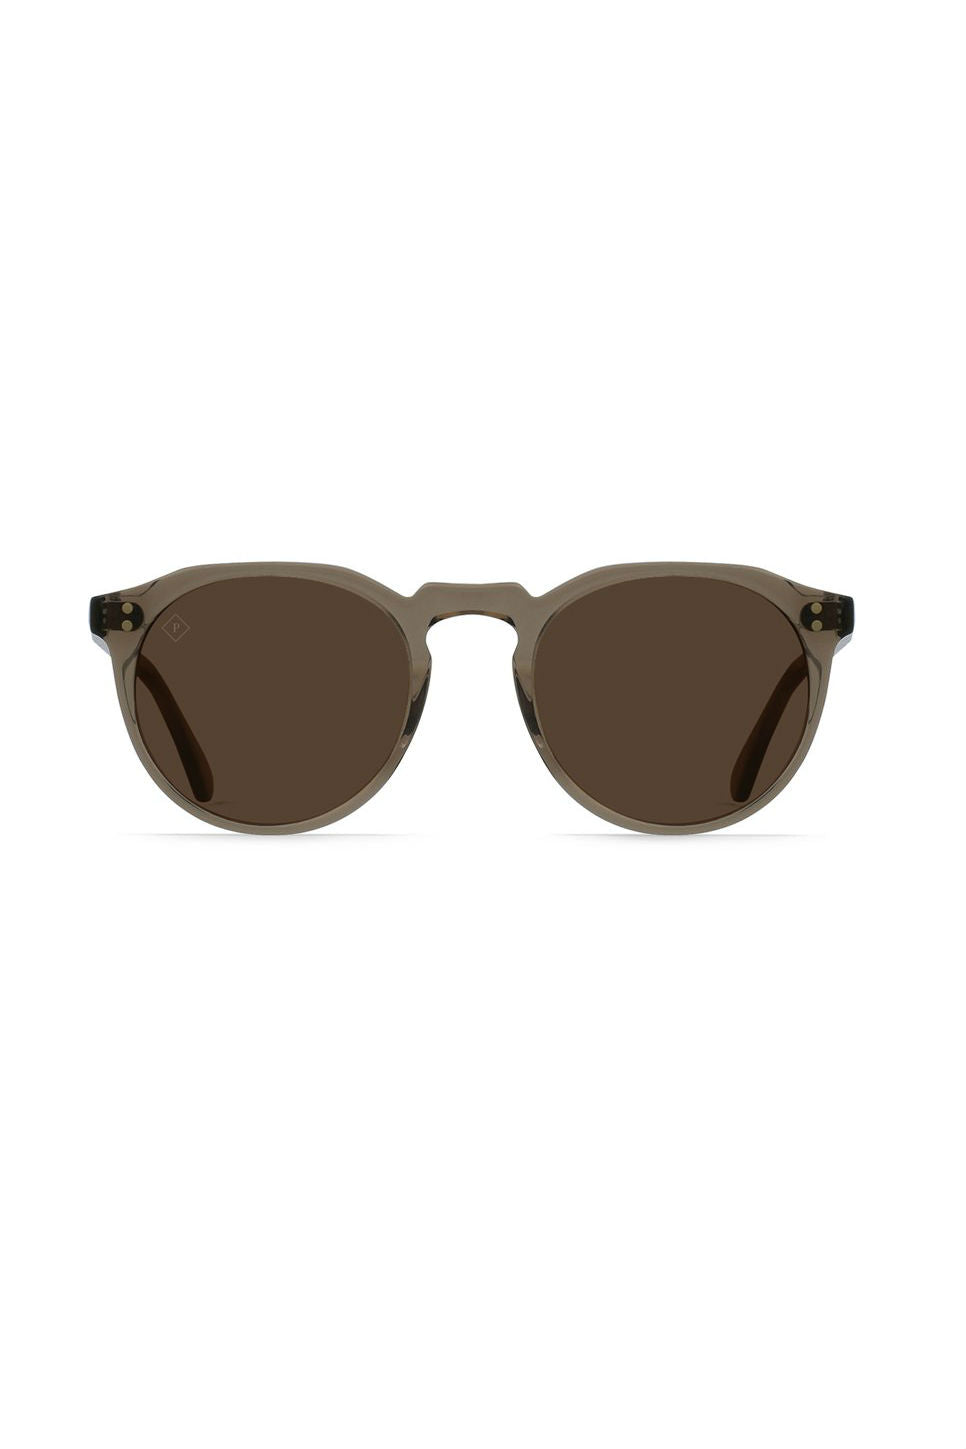 RAEN - Remmy 52 - Ghost/Vibrant Brown Polar - Front